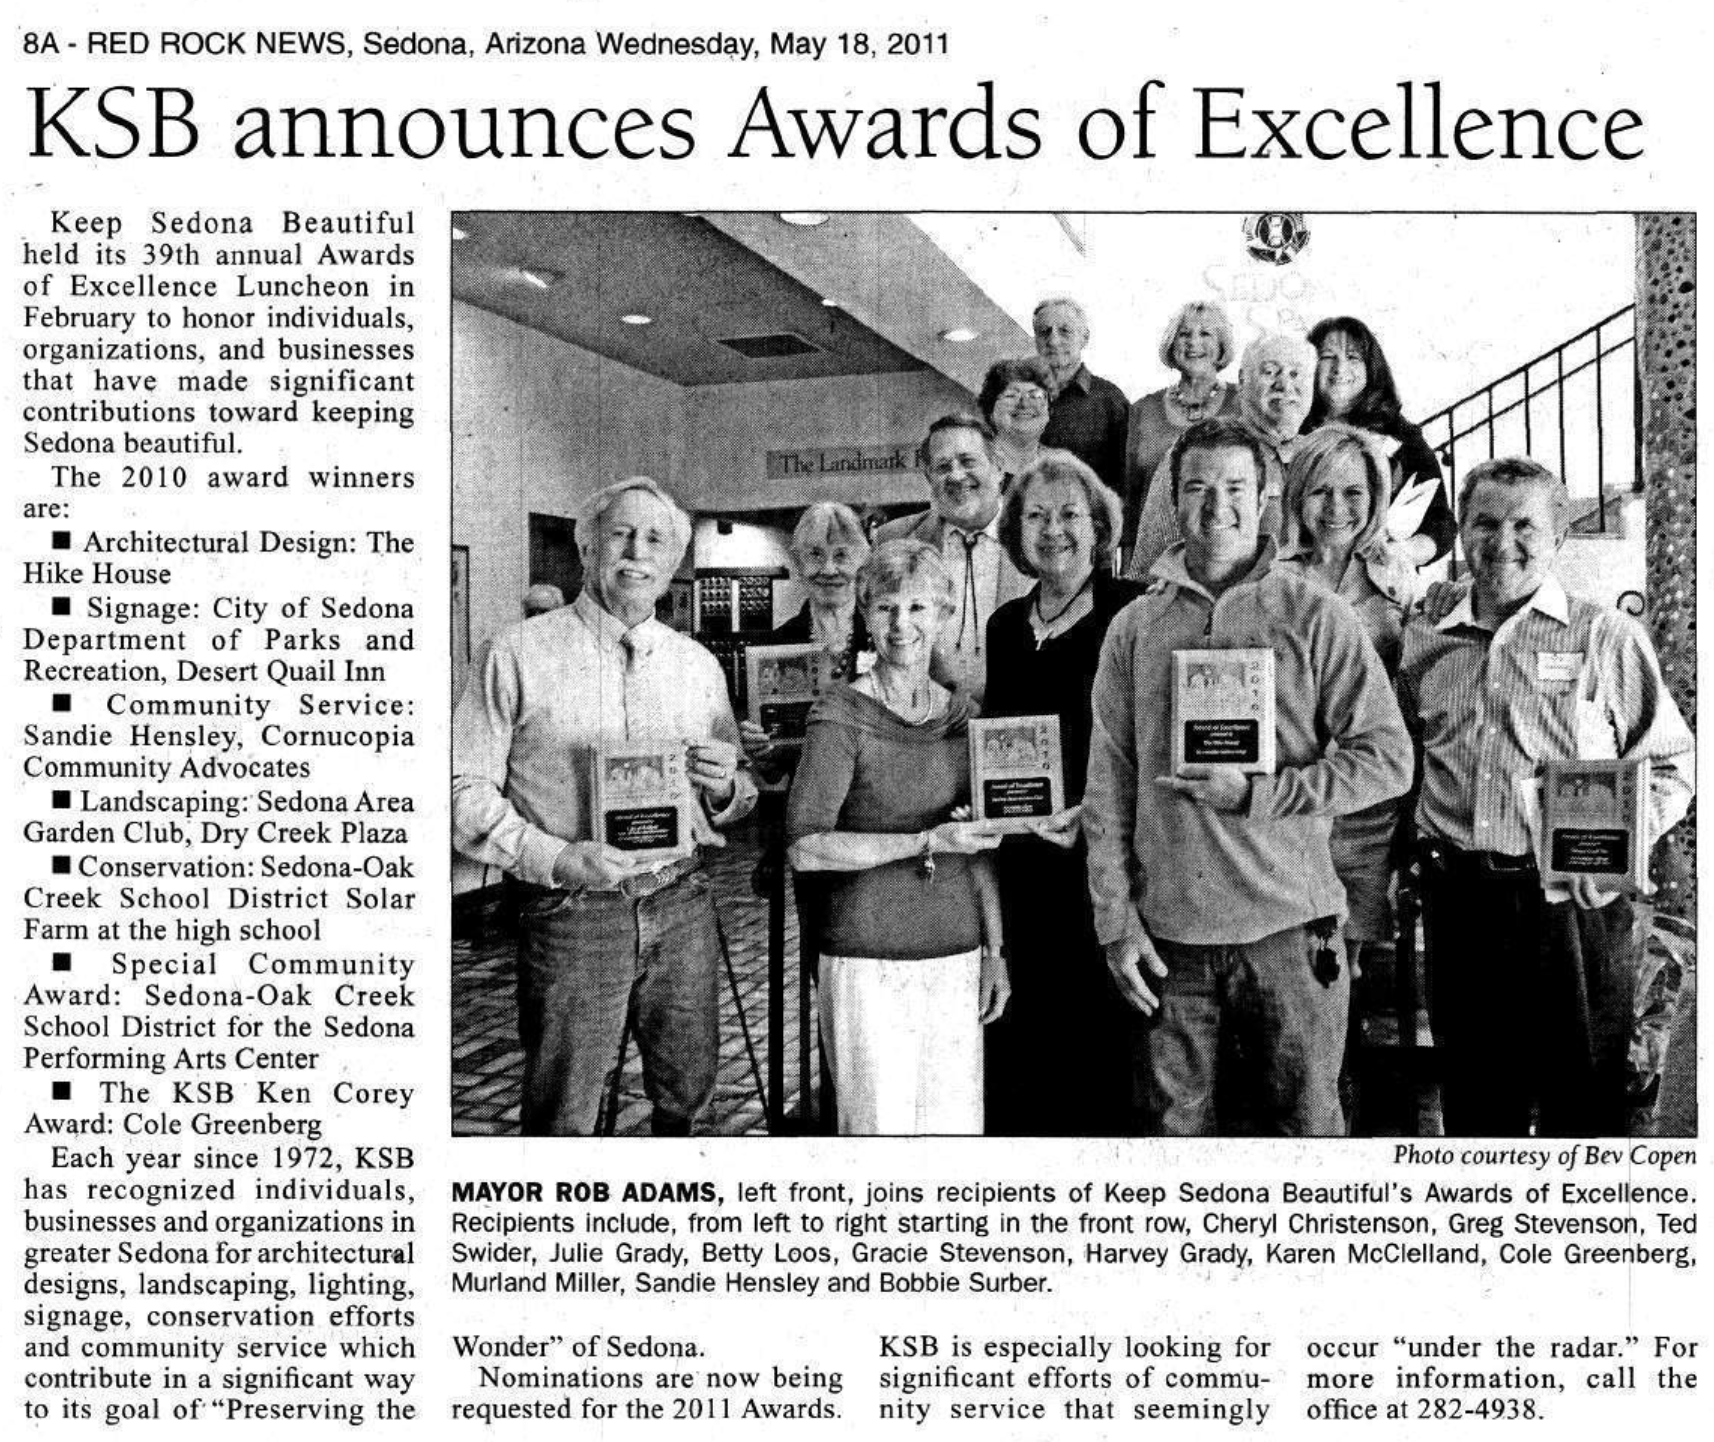 2011 Awards of Excellence